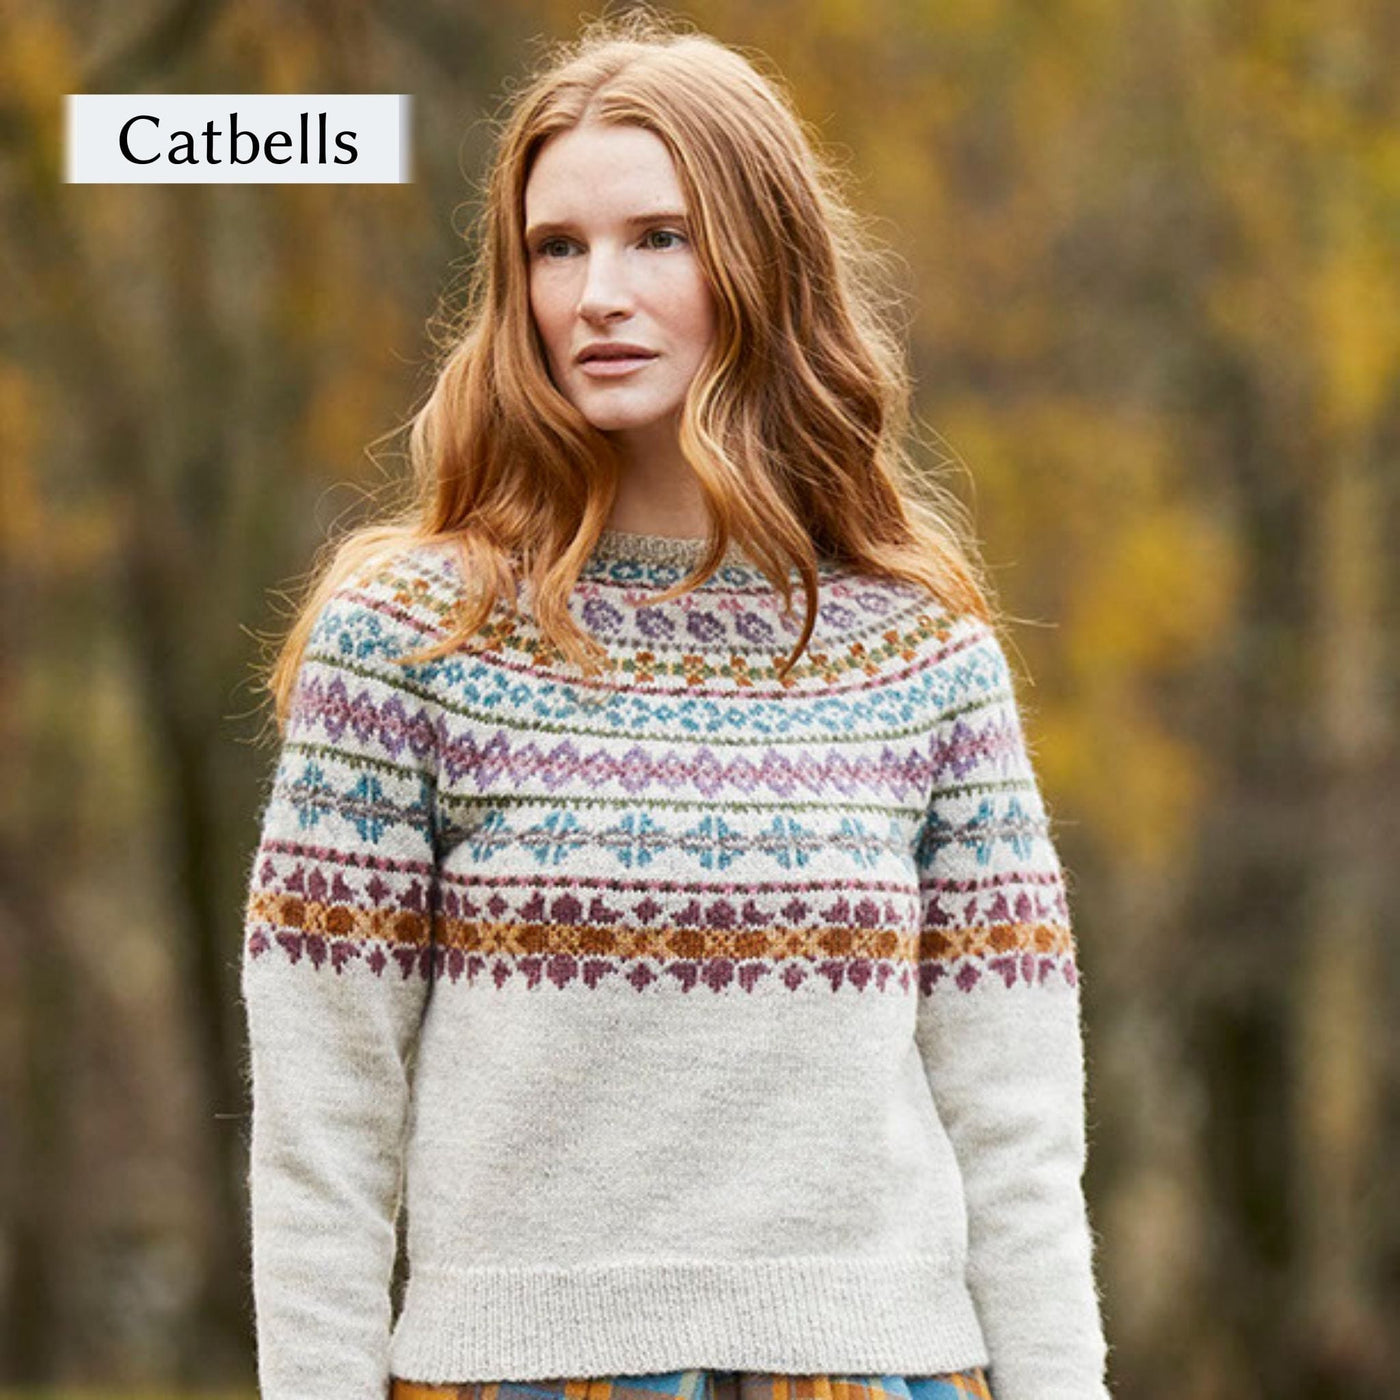 Model wearing Catbells sweater from Cumbria Book by Mare Wallin color